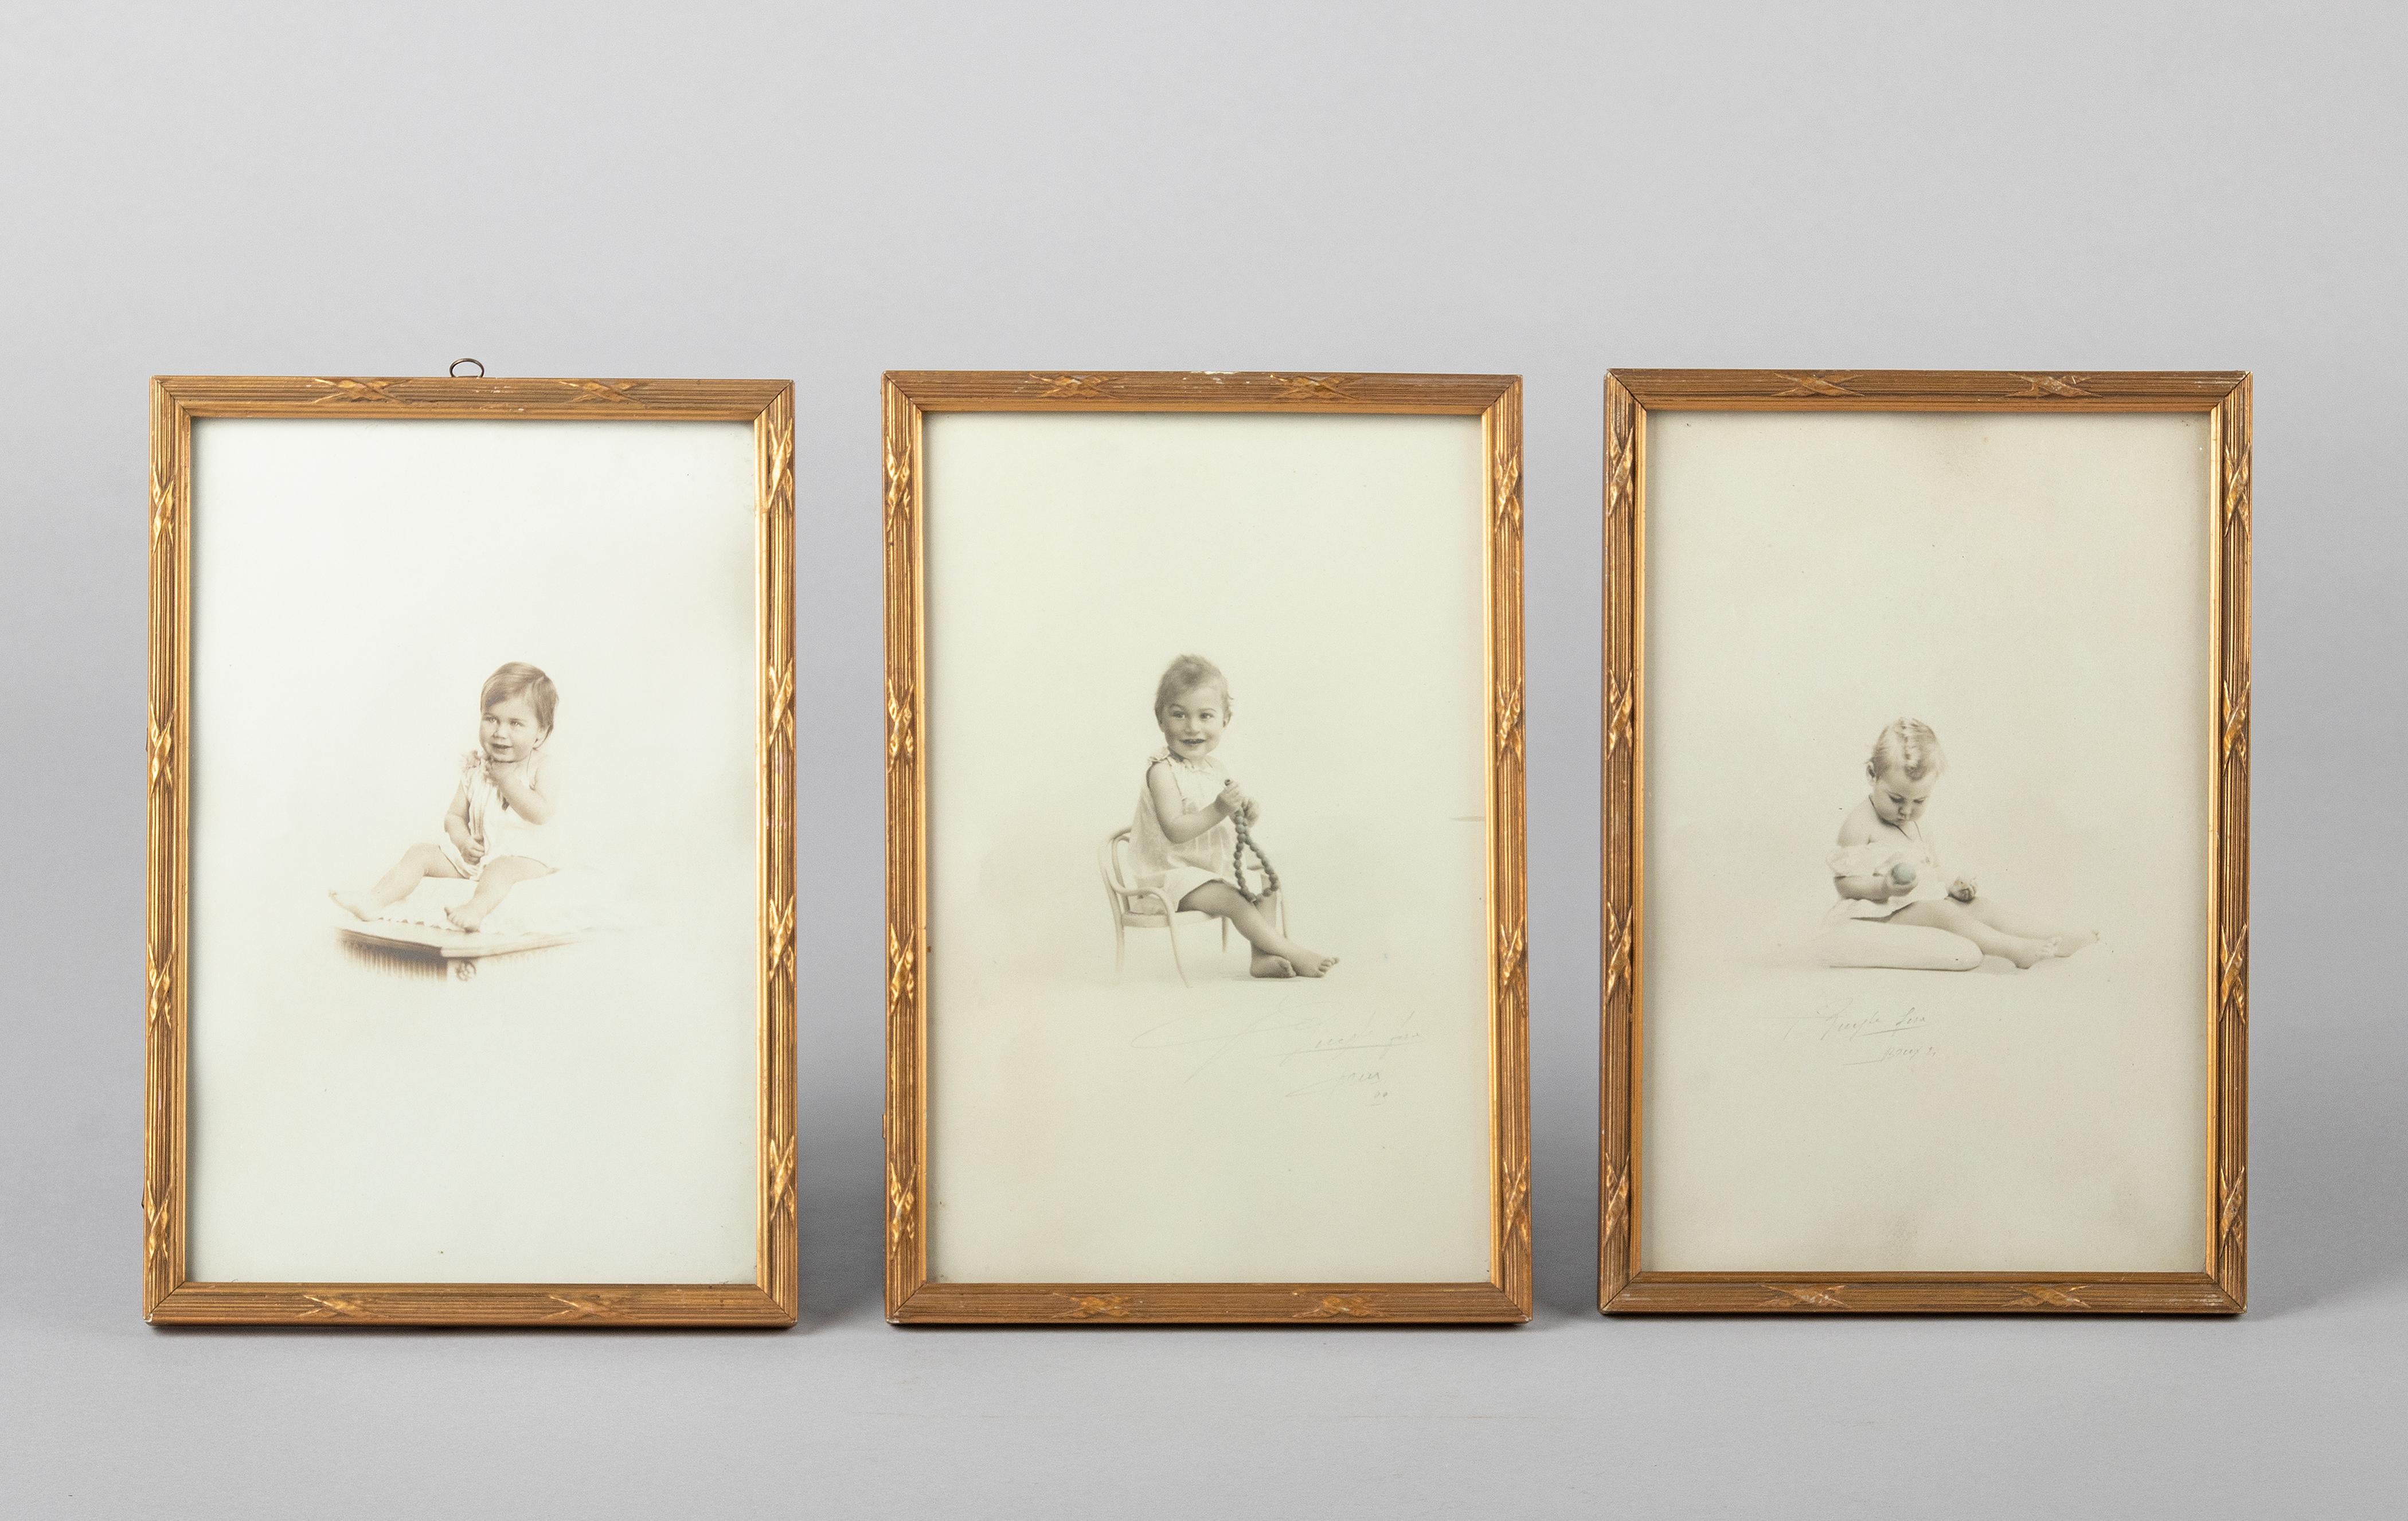 French Set of 3 Early 20th Century Picture Frames in Louis XVI-Style